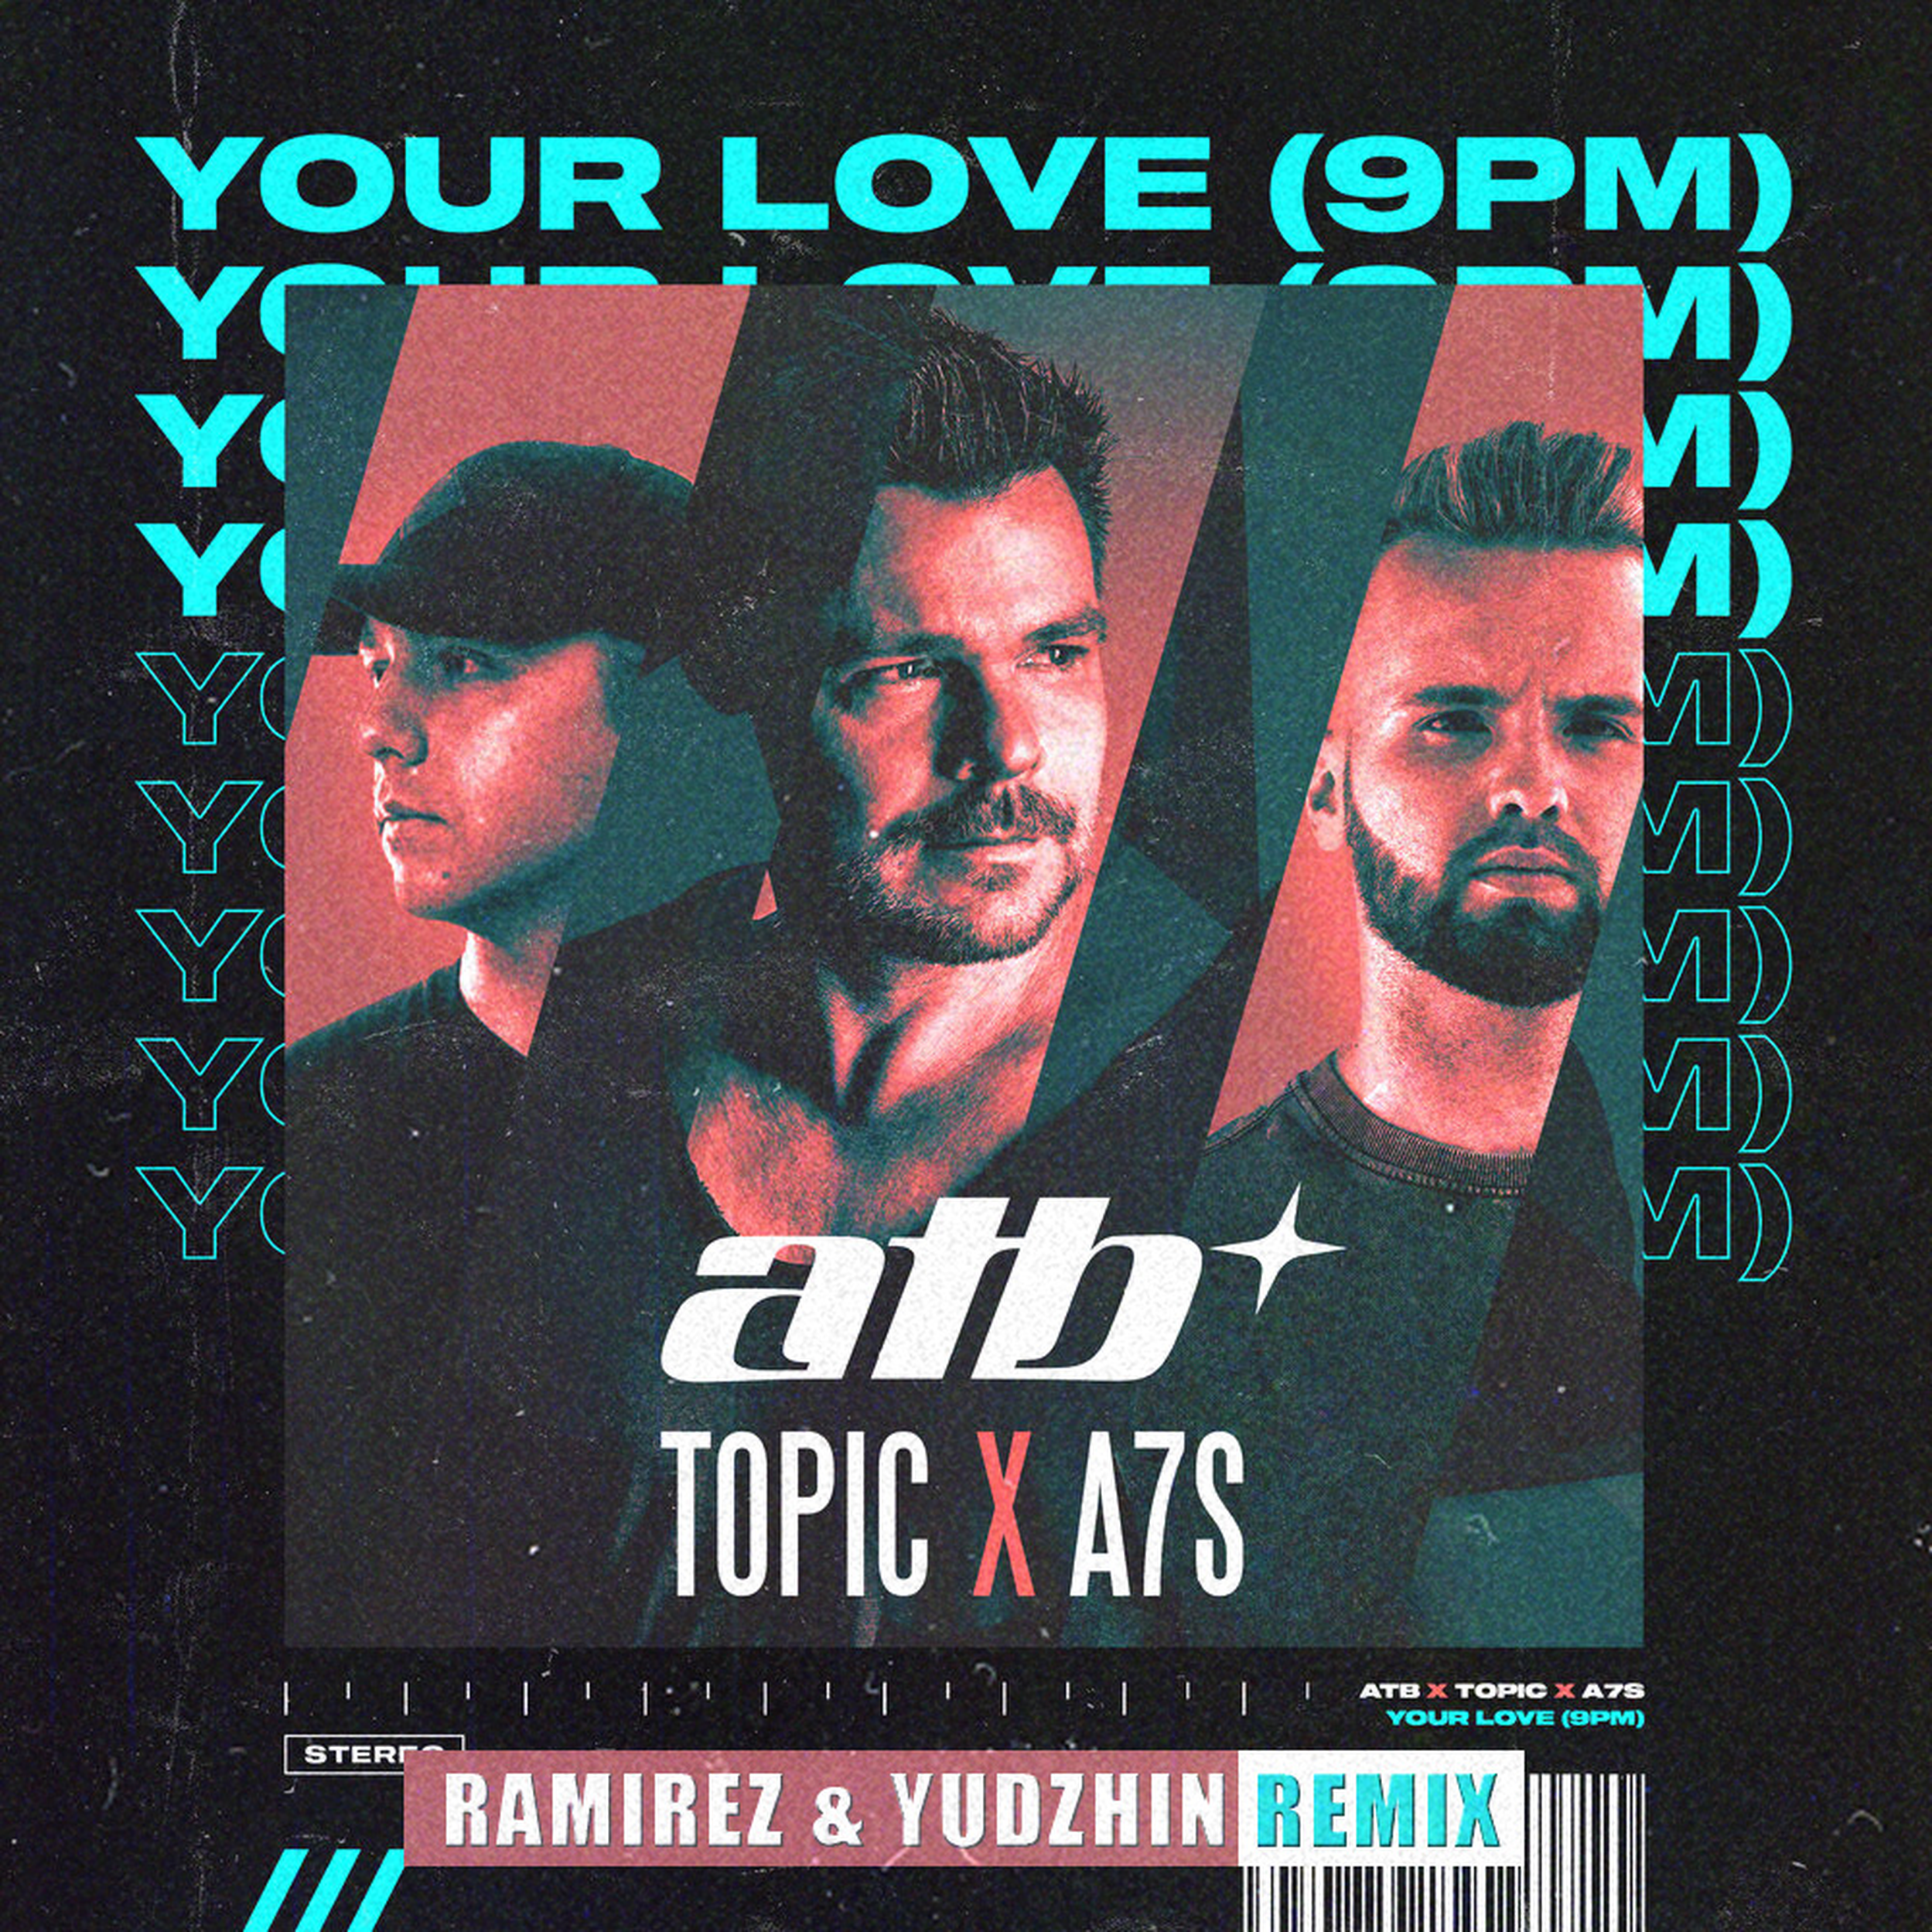 Atb topic your. ATB, topic, a7s - your Love (9pm). ATB topic a7s your Love.